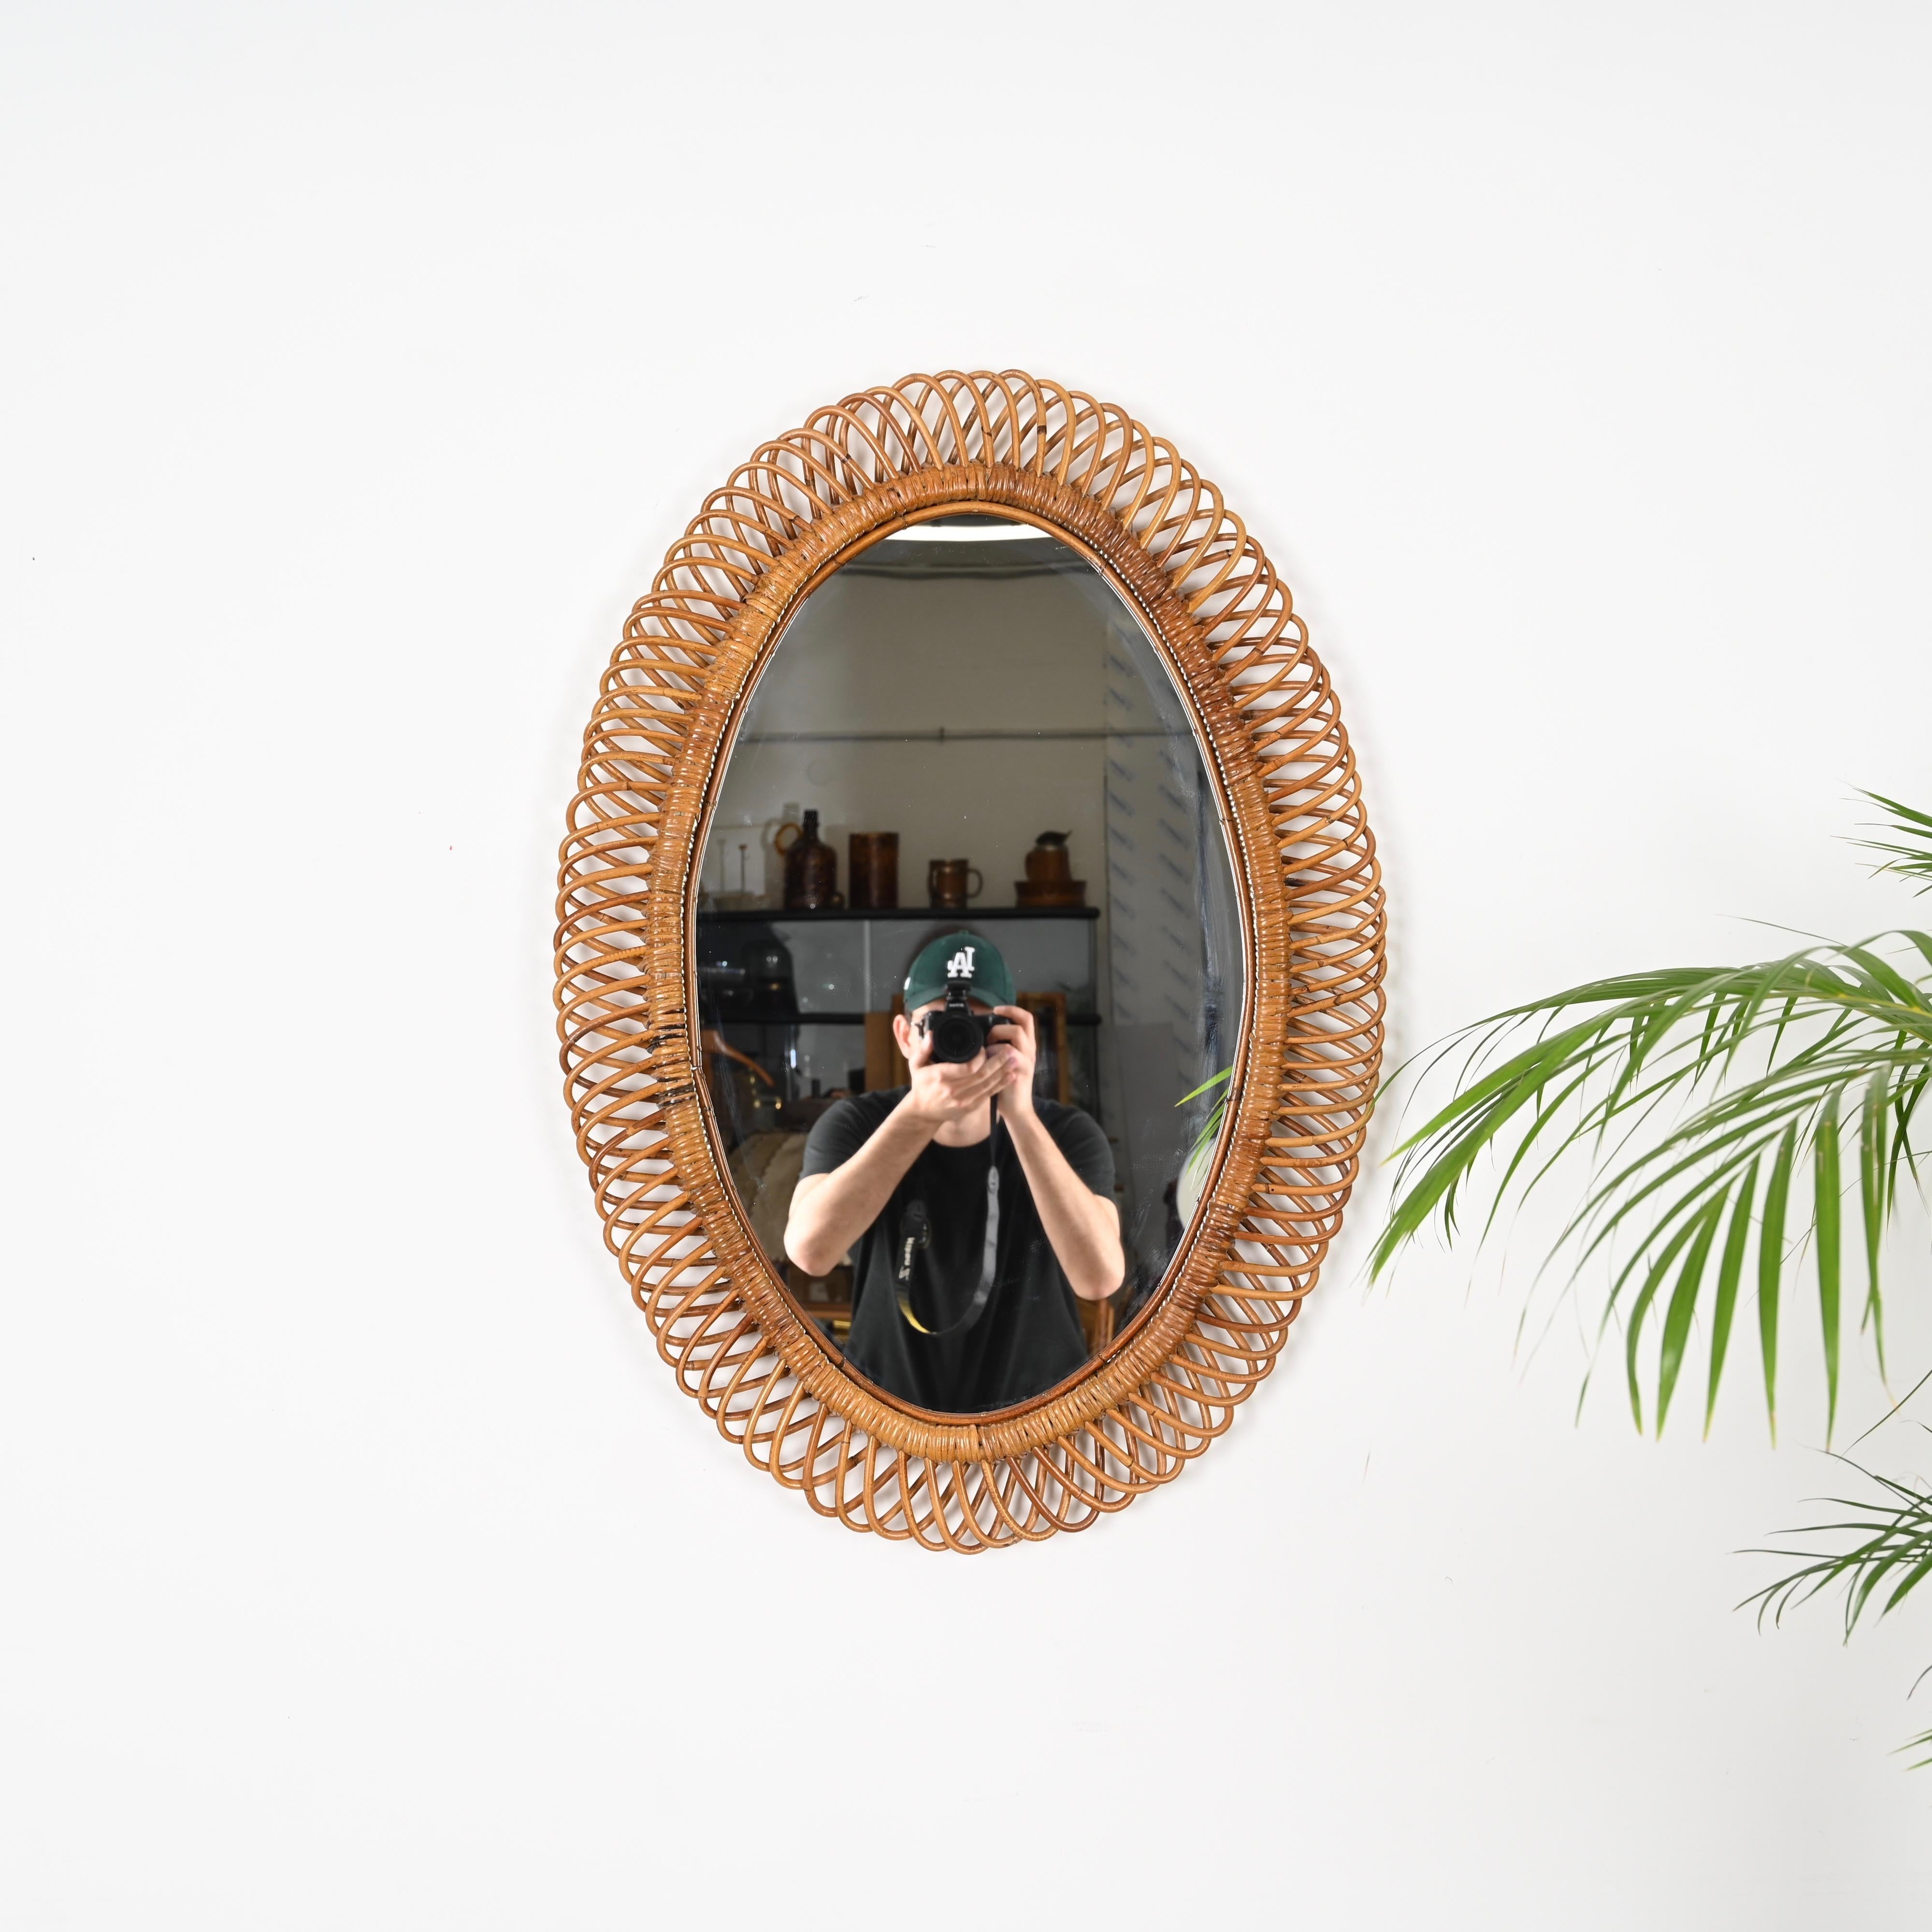 Large Mid-Century French Riviera oval mirror in curved rattan, bamboo and wicker. This gorgeous piece was designed by Franco Albini and produced in Italy during the 1960s.

This lovely organic oval mirror has an elegant double frame made in